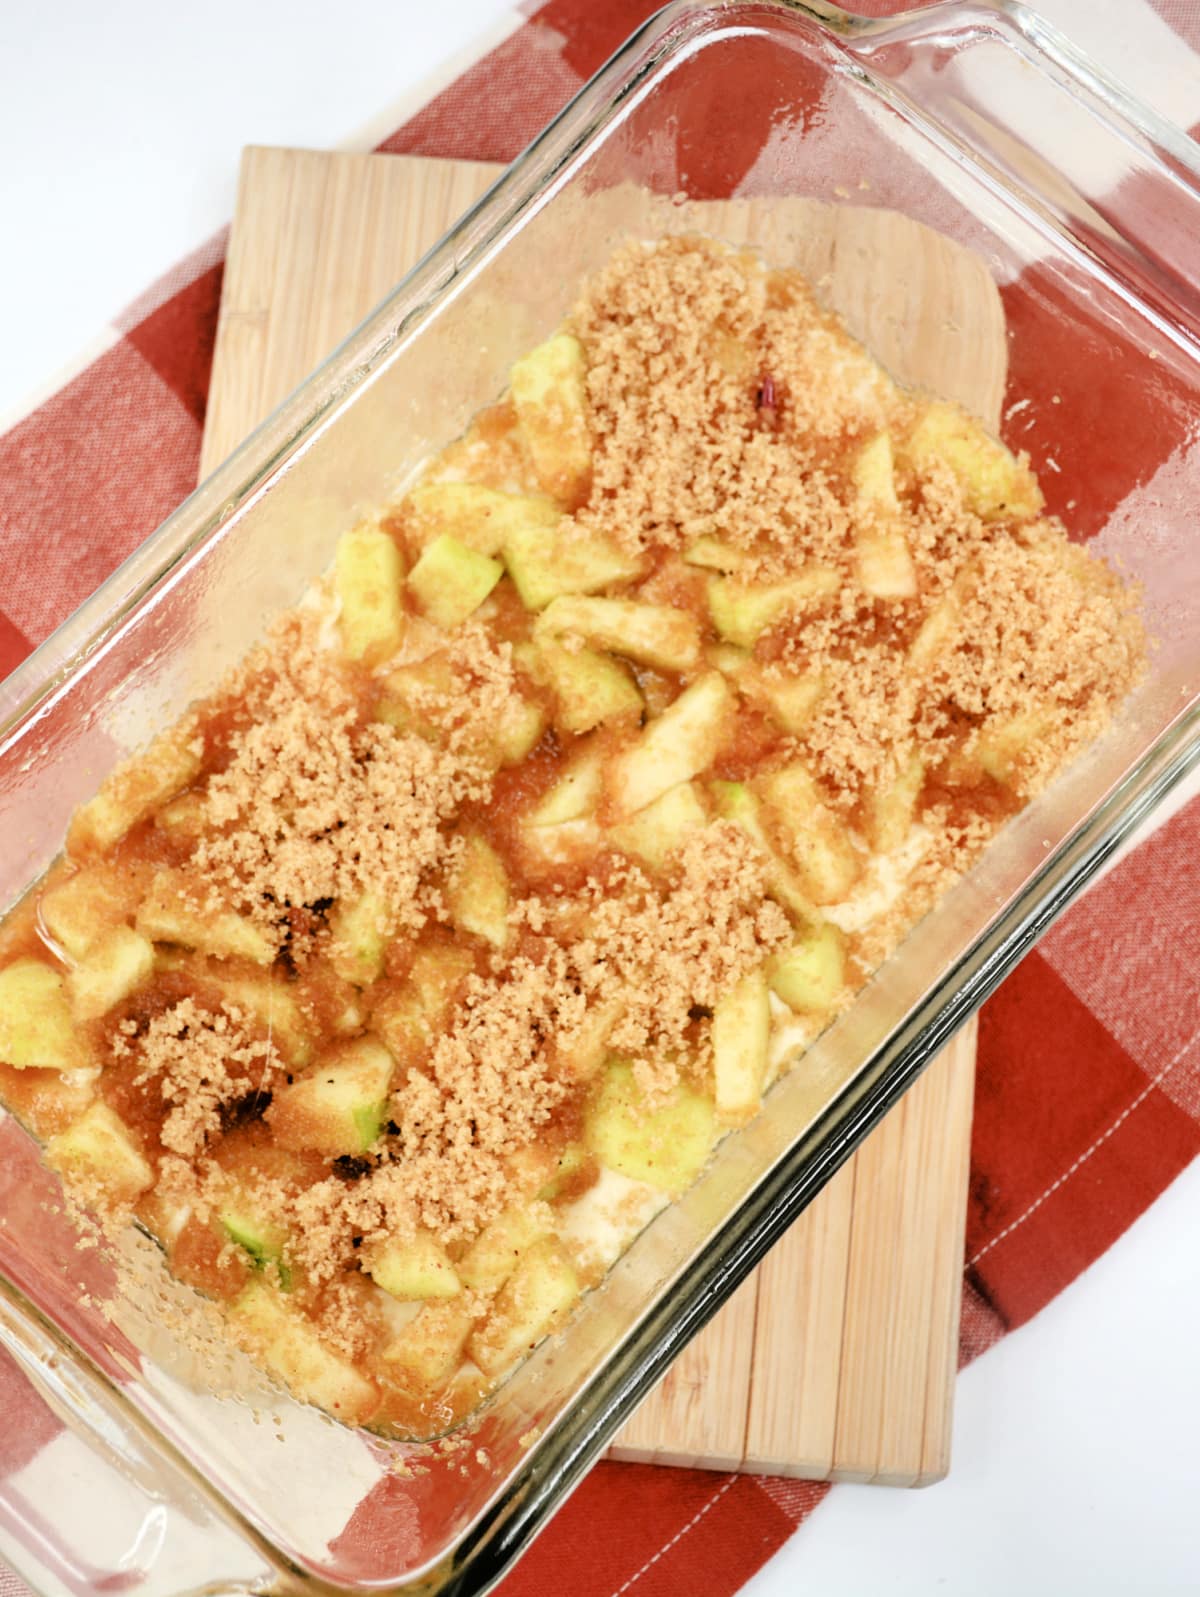 Apple crumble casserole in a glass baking dish.